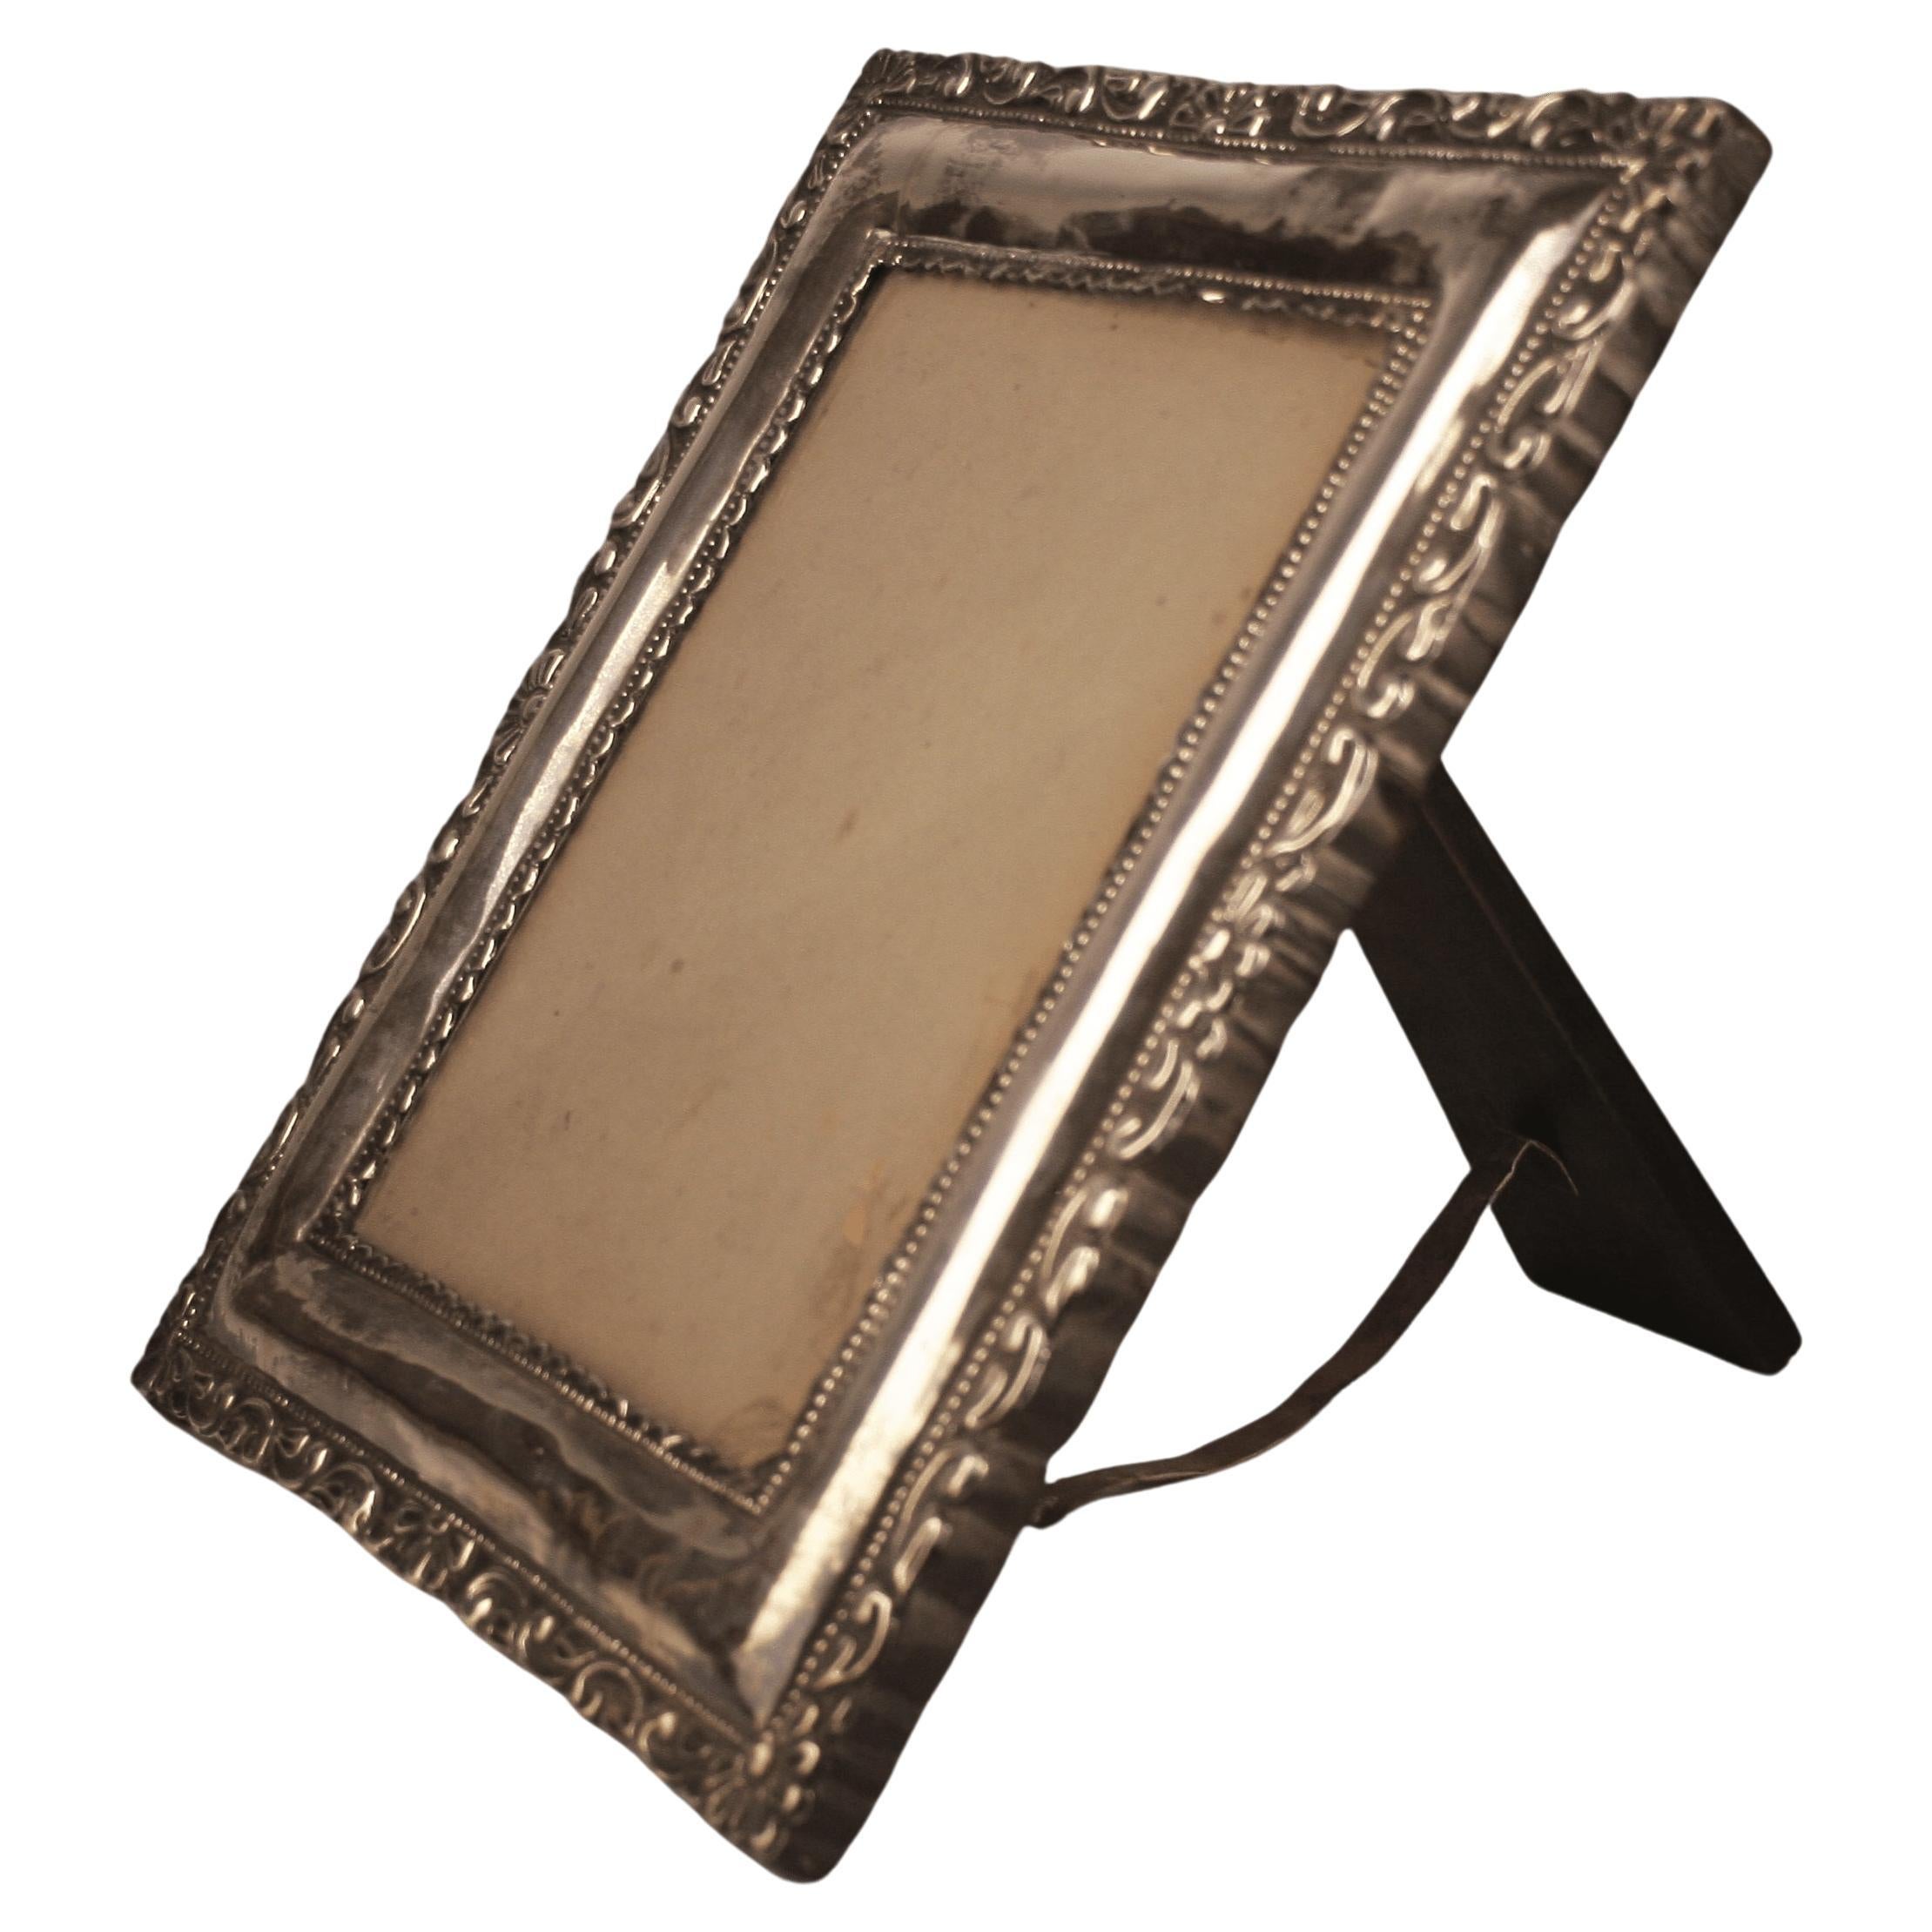 Circa 1900 Neoclassical Wooden Frame with Repoussé Silvered Metal Front Plate For Sale